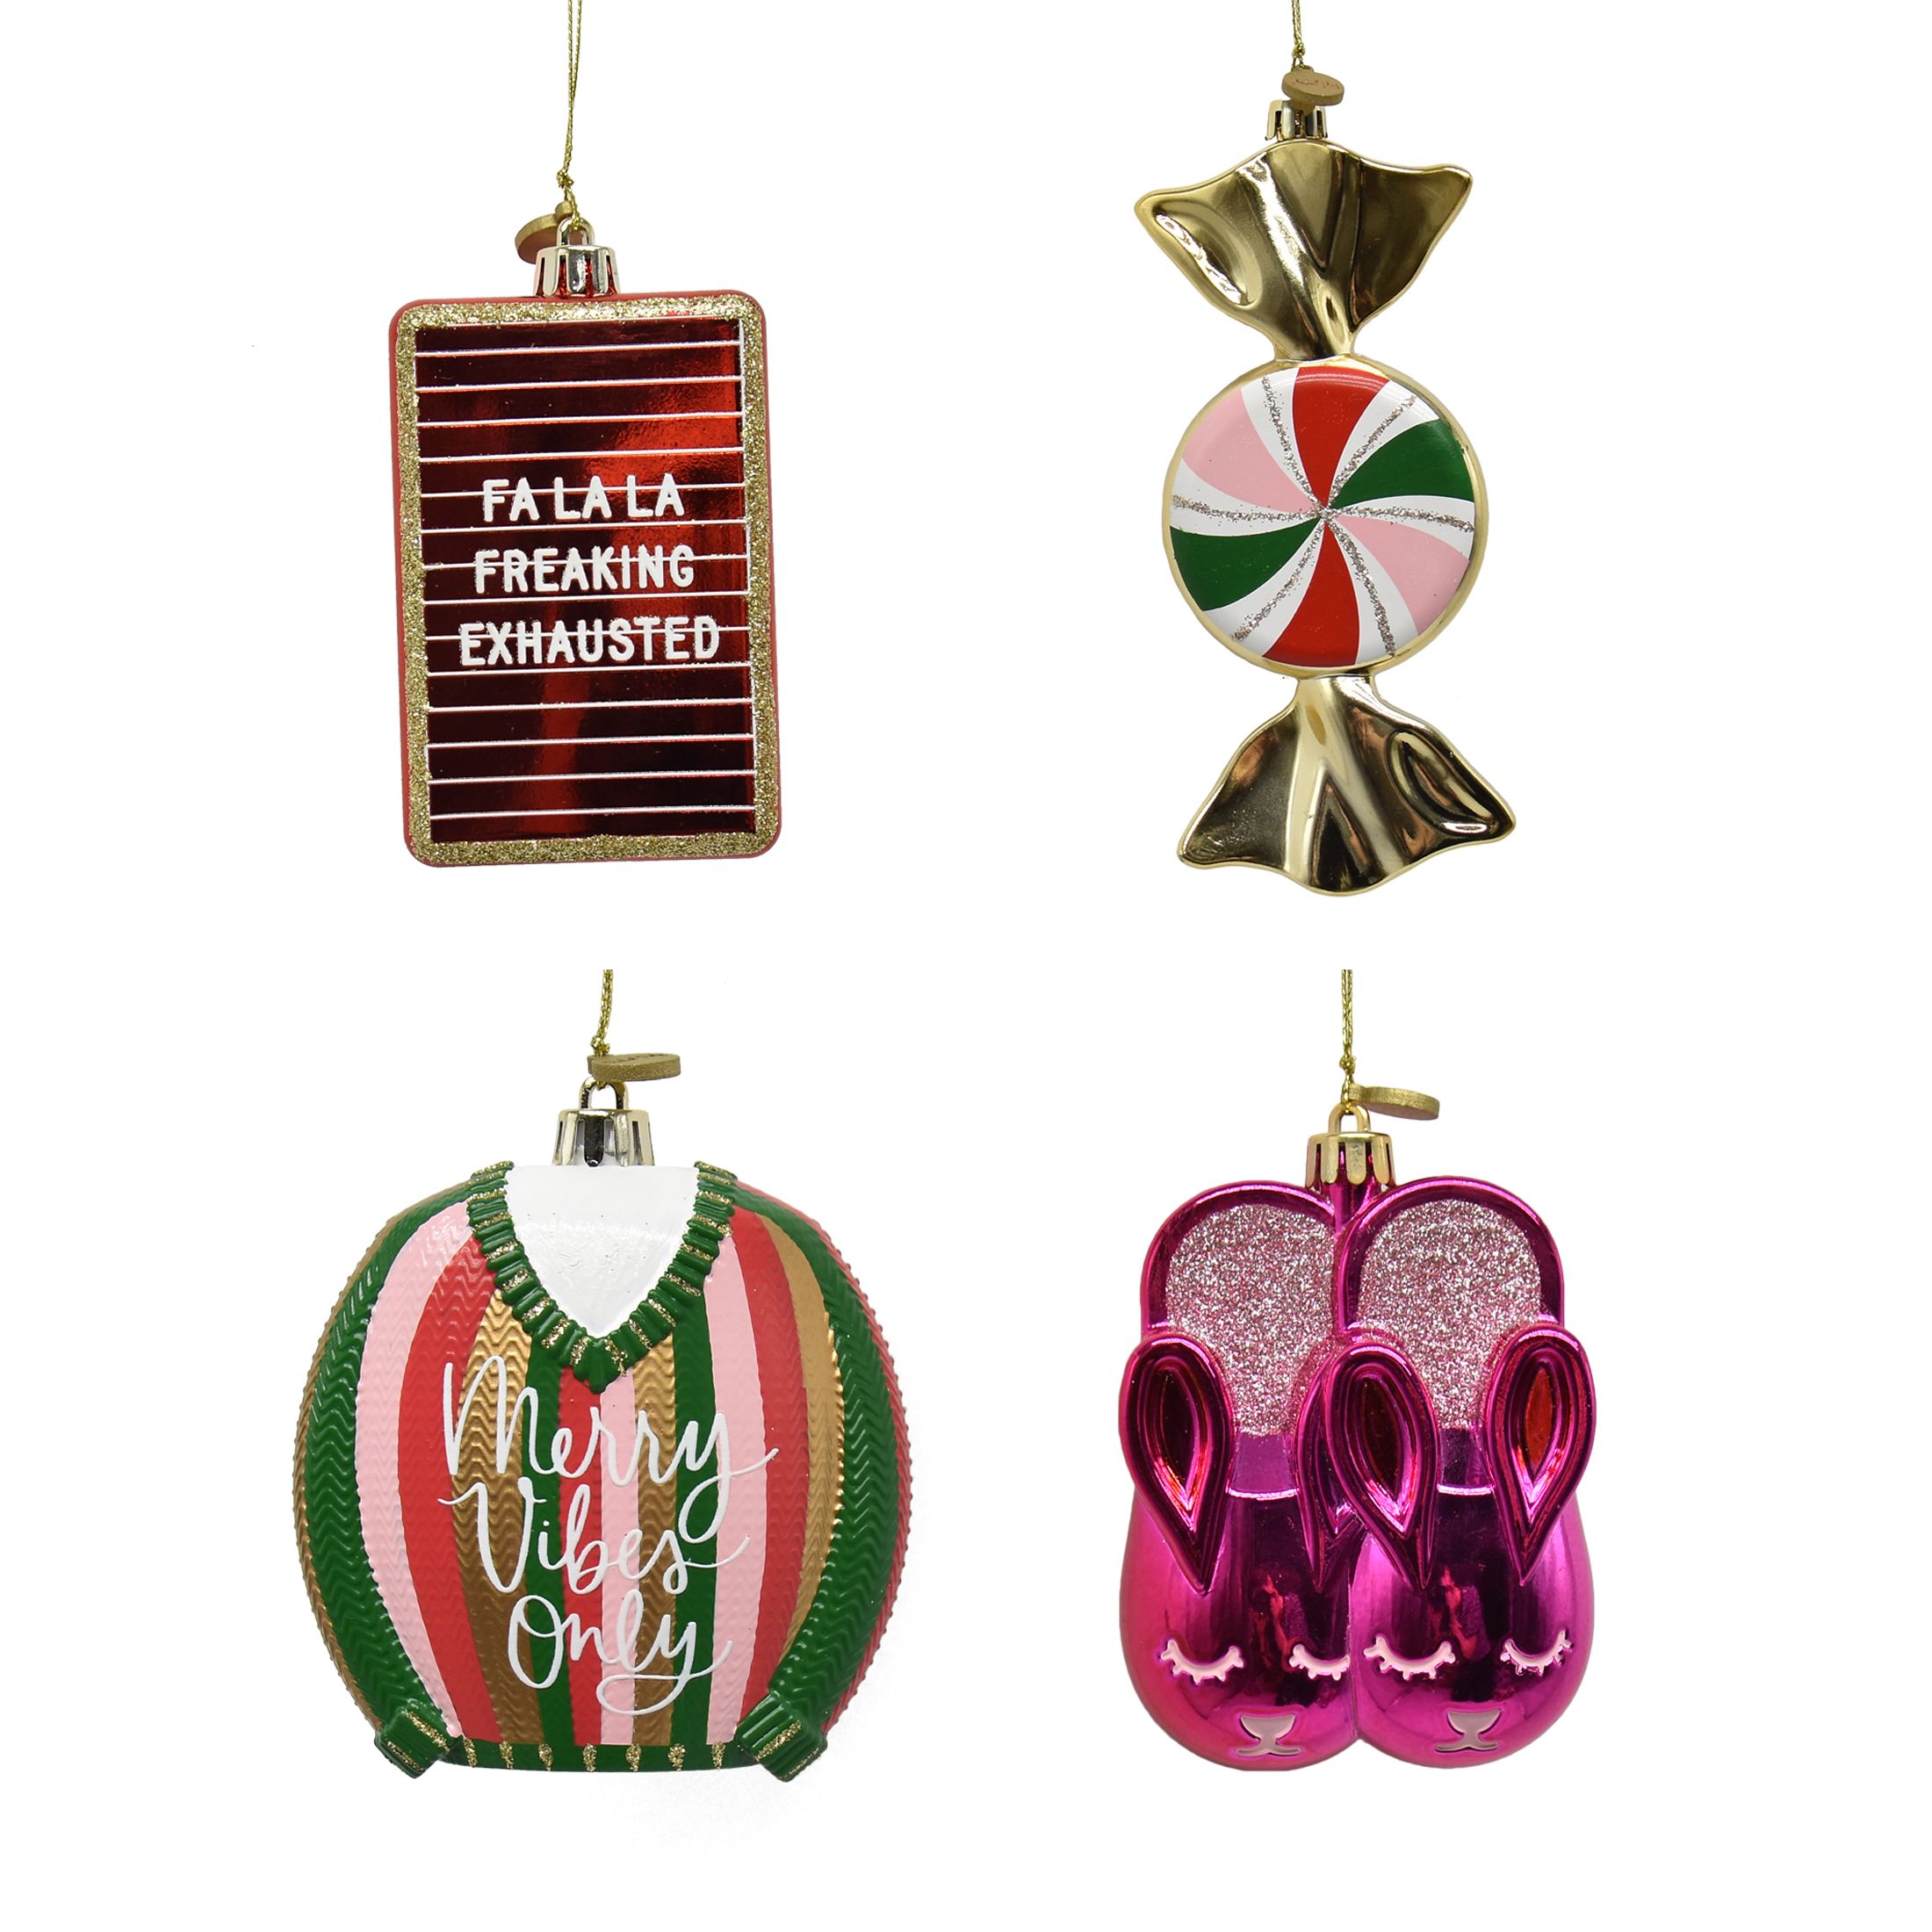 Packed Party 4pc Classic Candy Striated Sweater Slipper Assorted Novelty Ornament Set - image 1 of 5